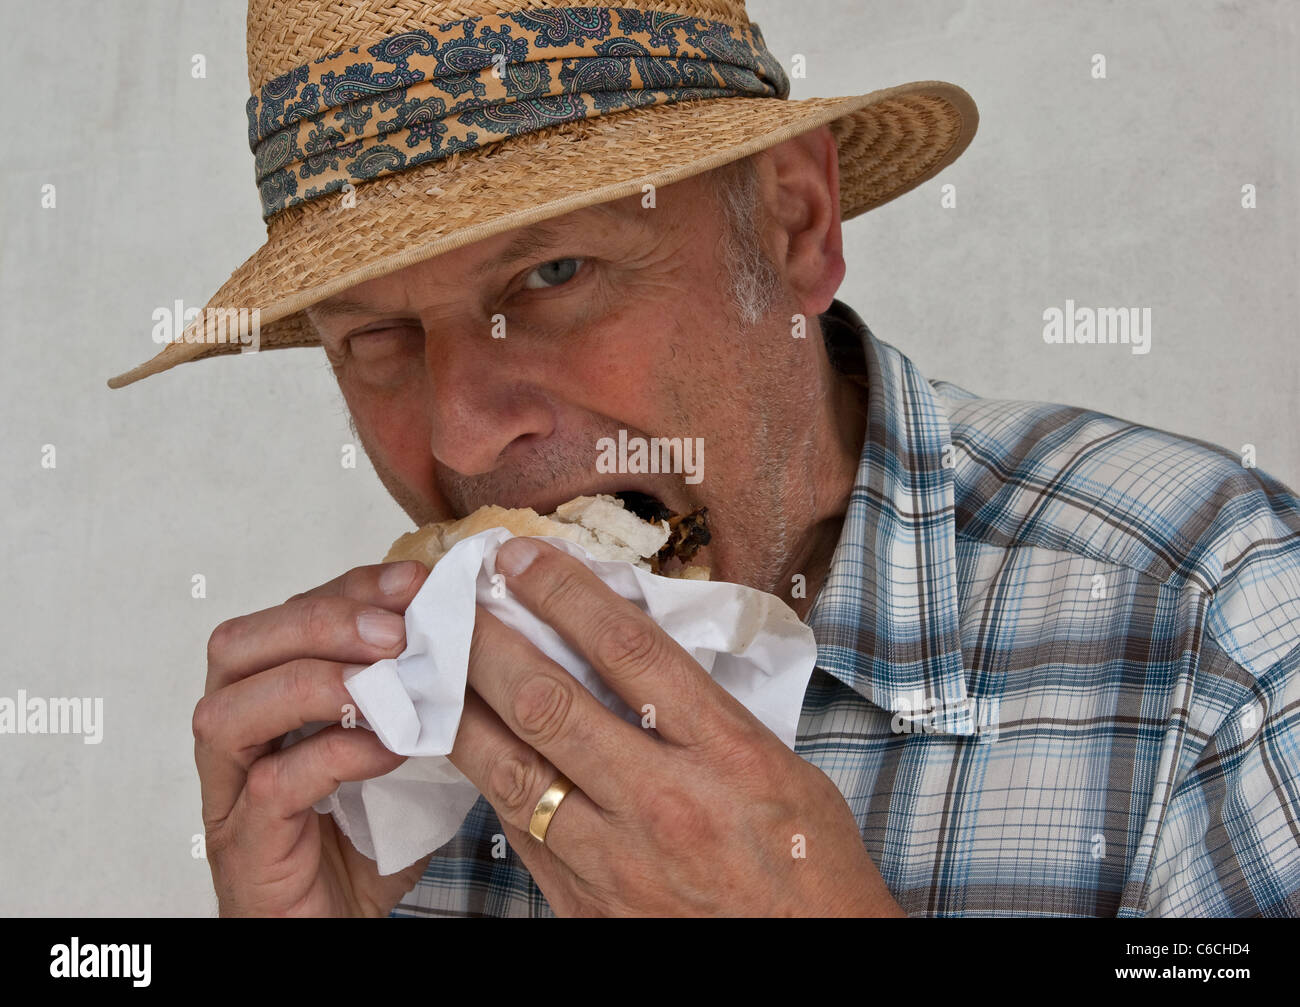 Head and shoulders shot of a middle aged man eating junk food. Stock Photo